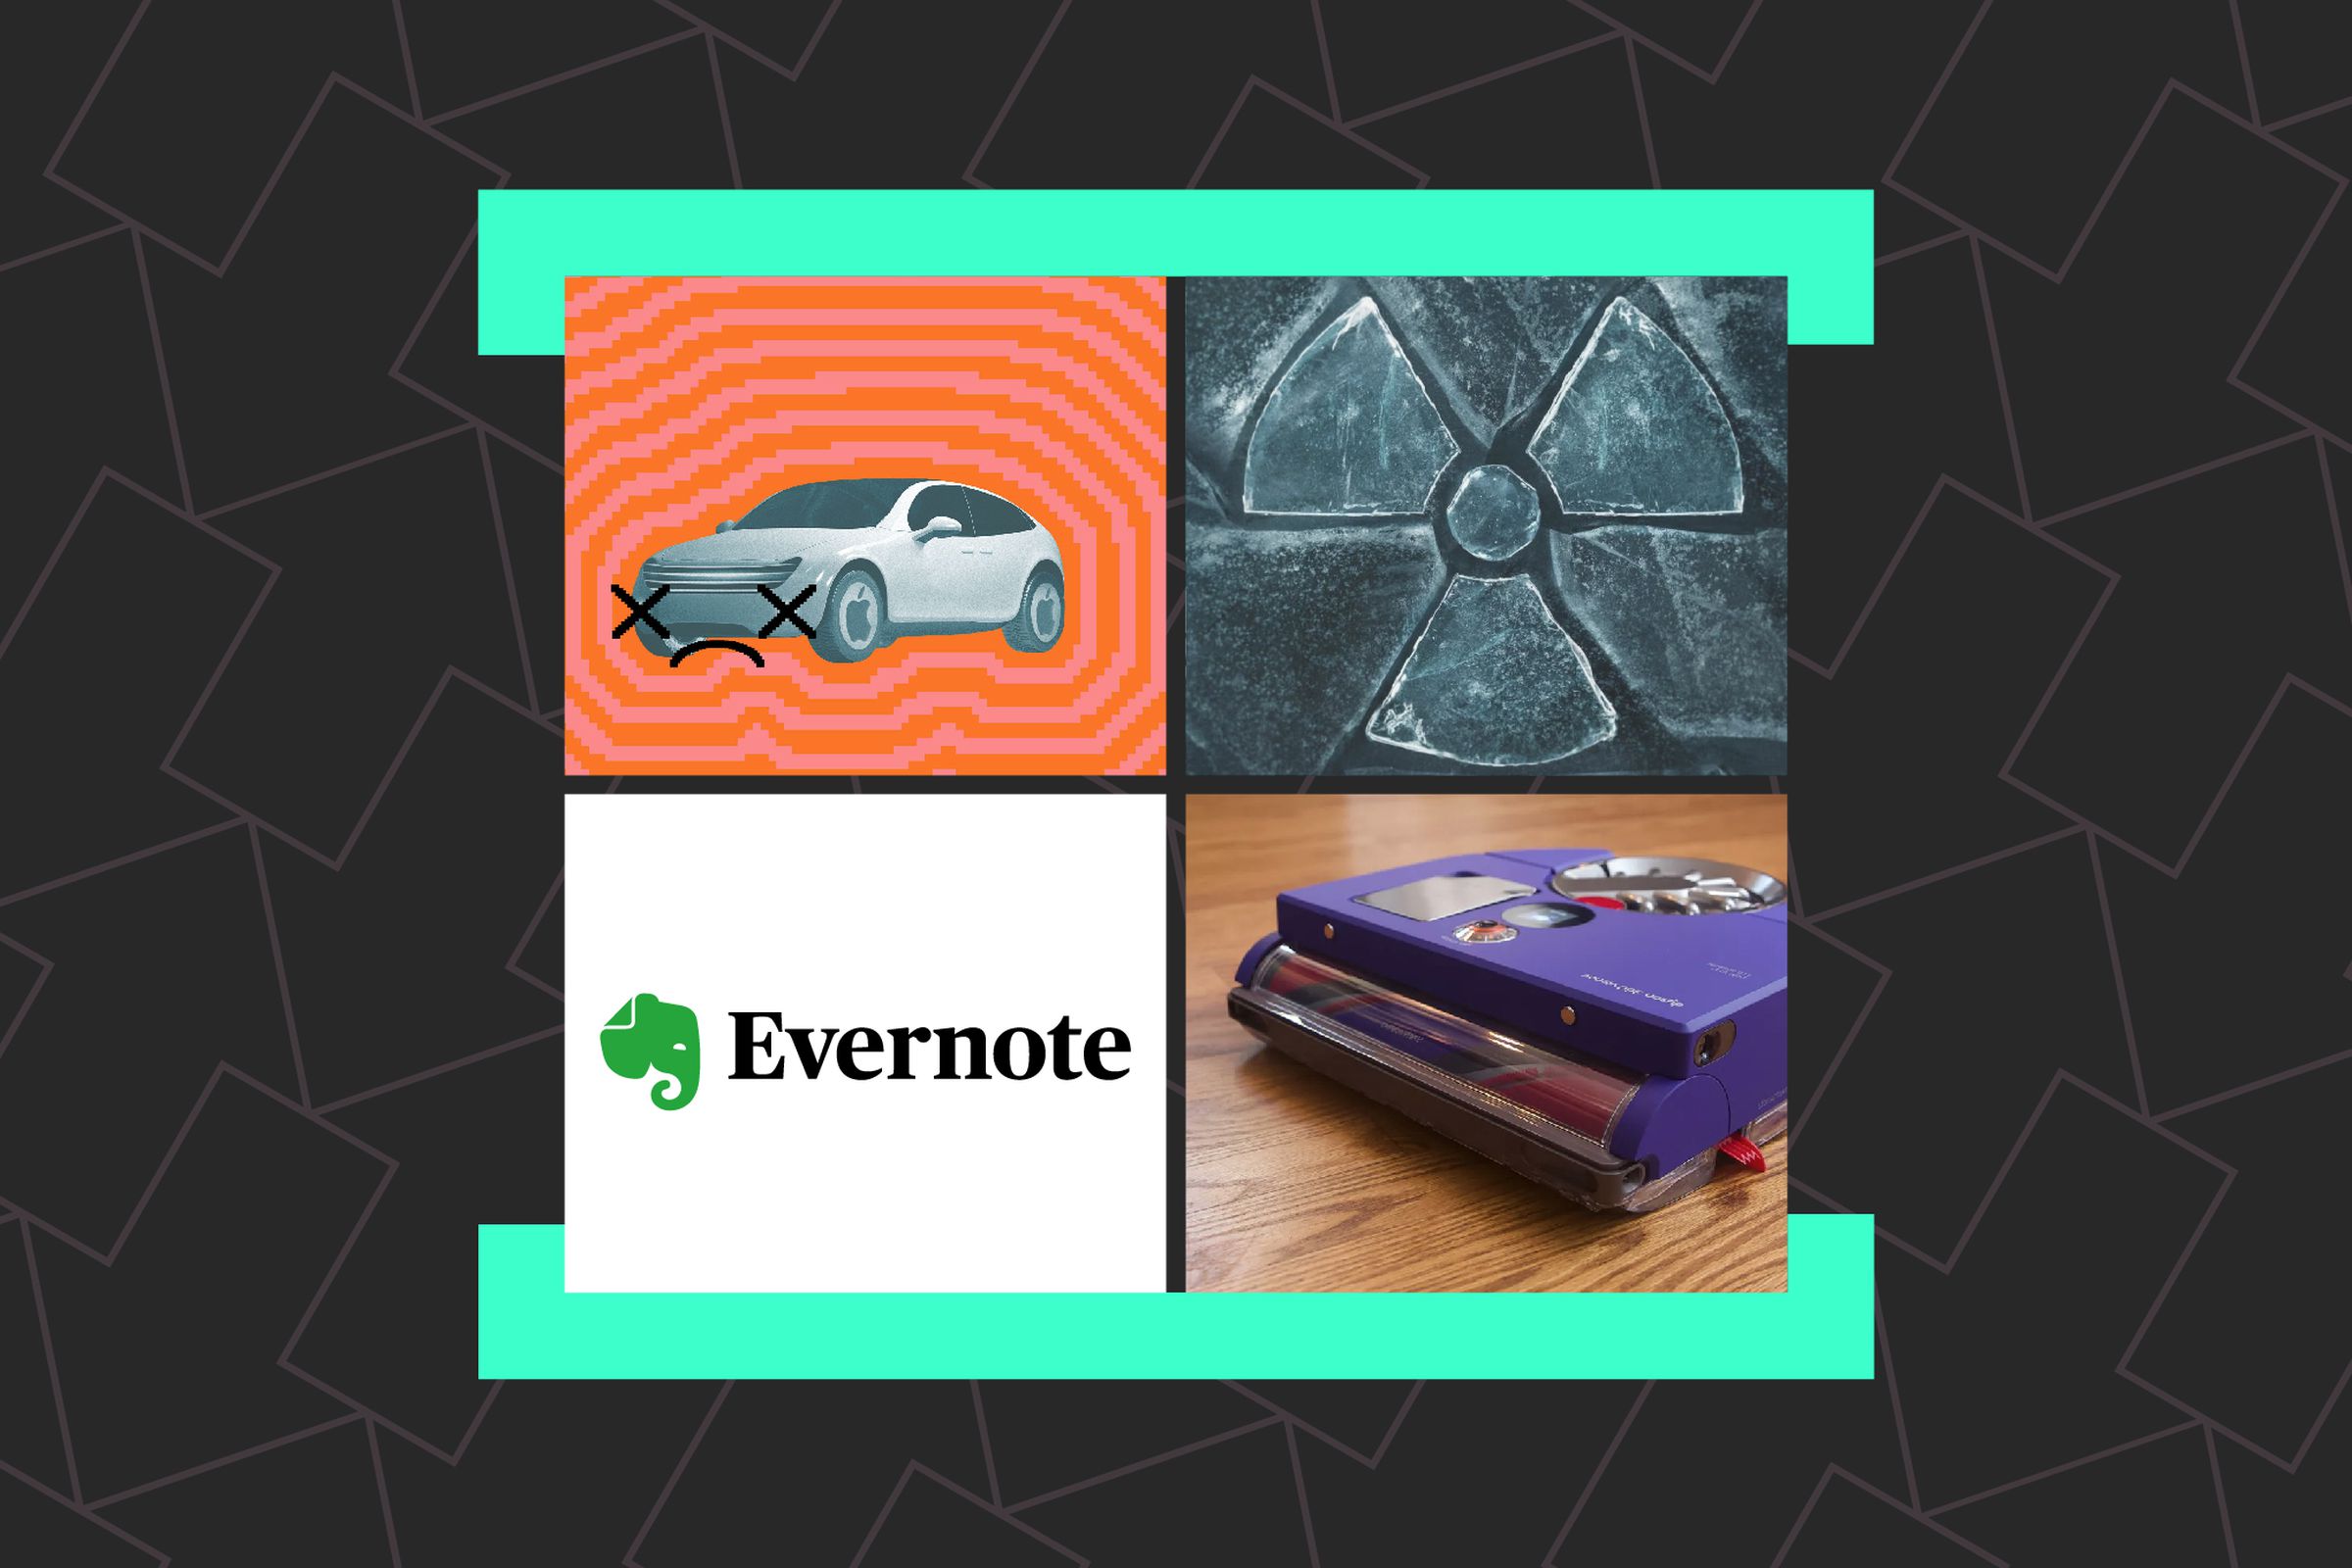 Photo collage of Apple car, Evernote logo, Dyson robot vac, and Turning Point key art for Installer.